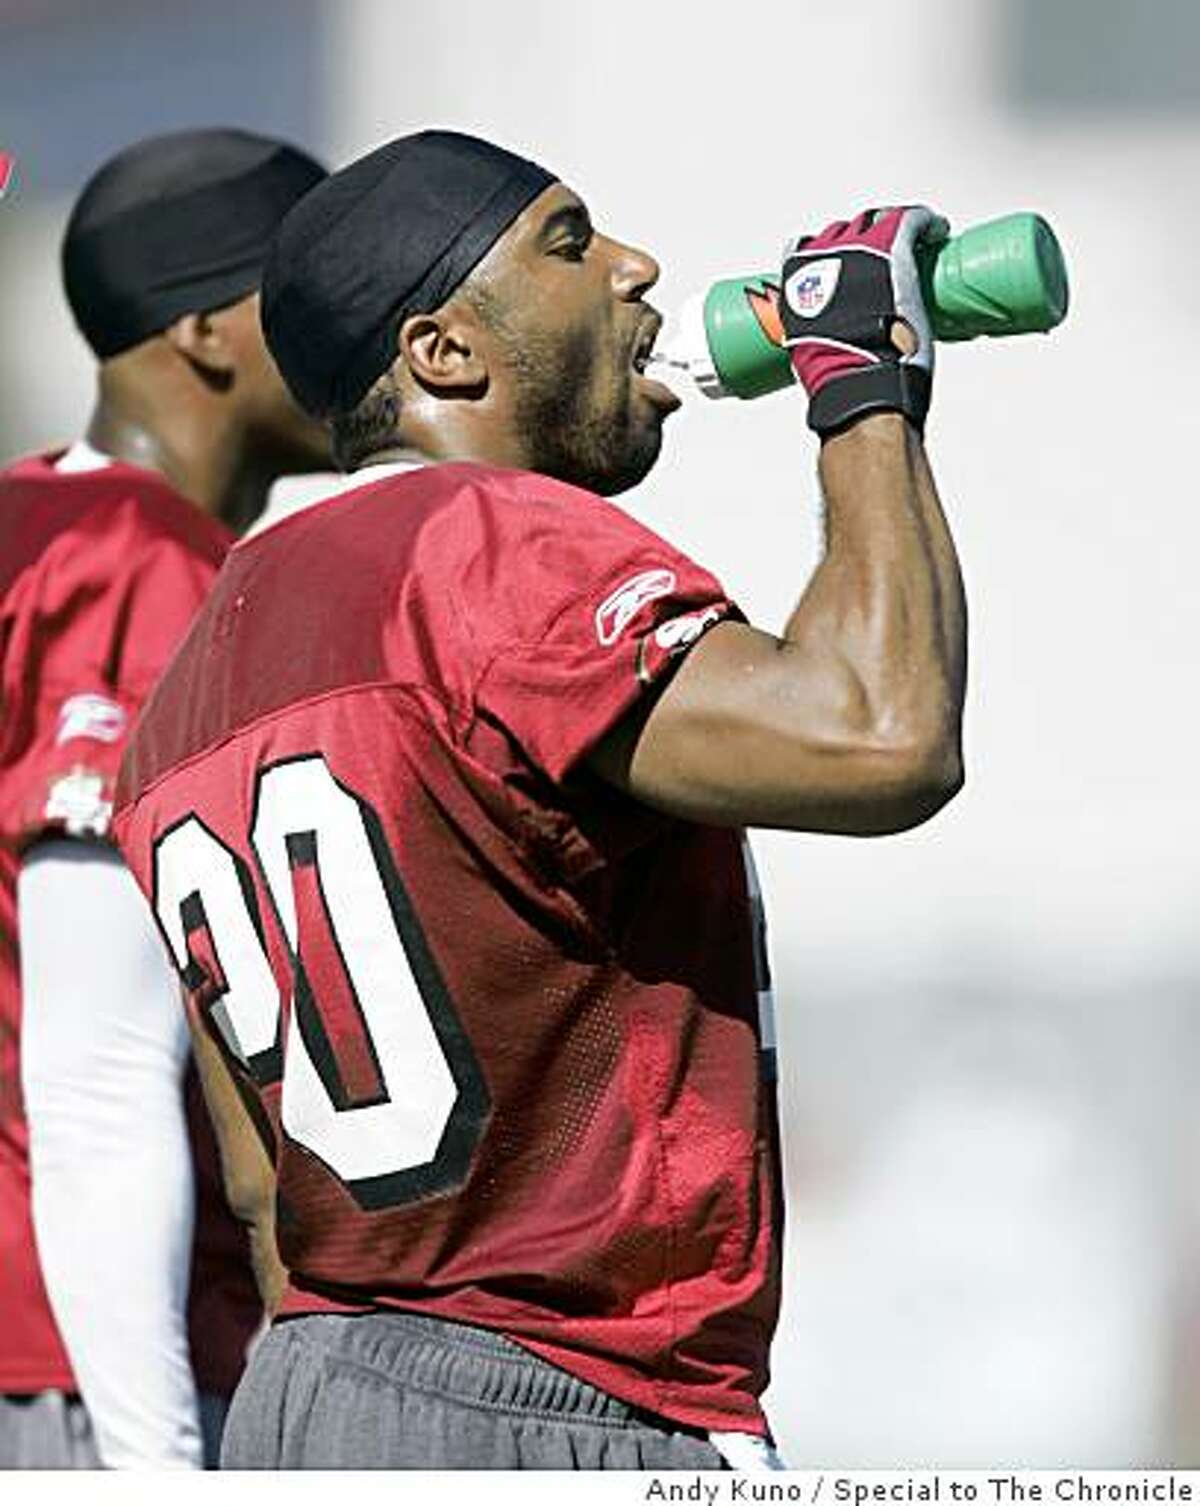 San Francisco 49ers cornerback Allen Rossum re-hydrates on the sidelines during training camp Saturday July 26, 2008 in San Clara, Calif. Photo by Andy Kuno / Special to the Chronicle